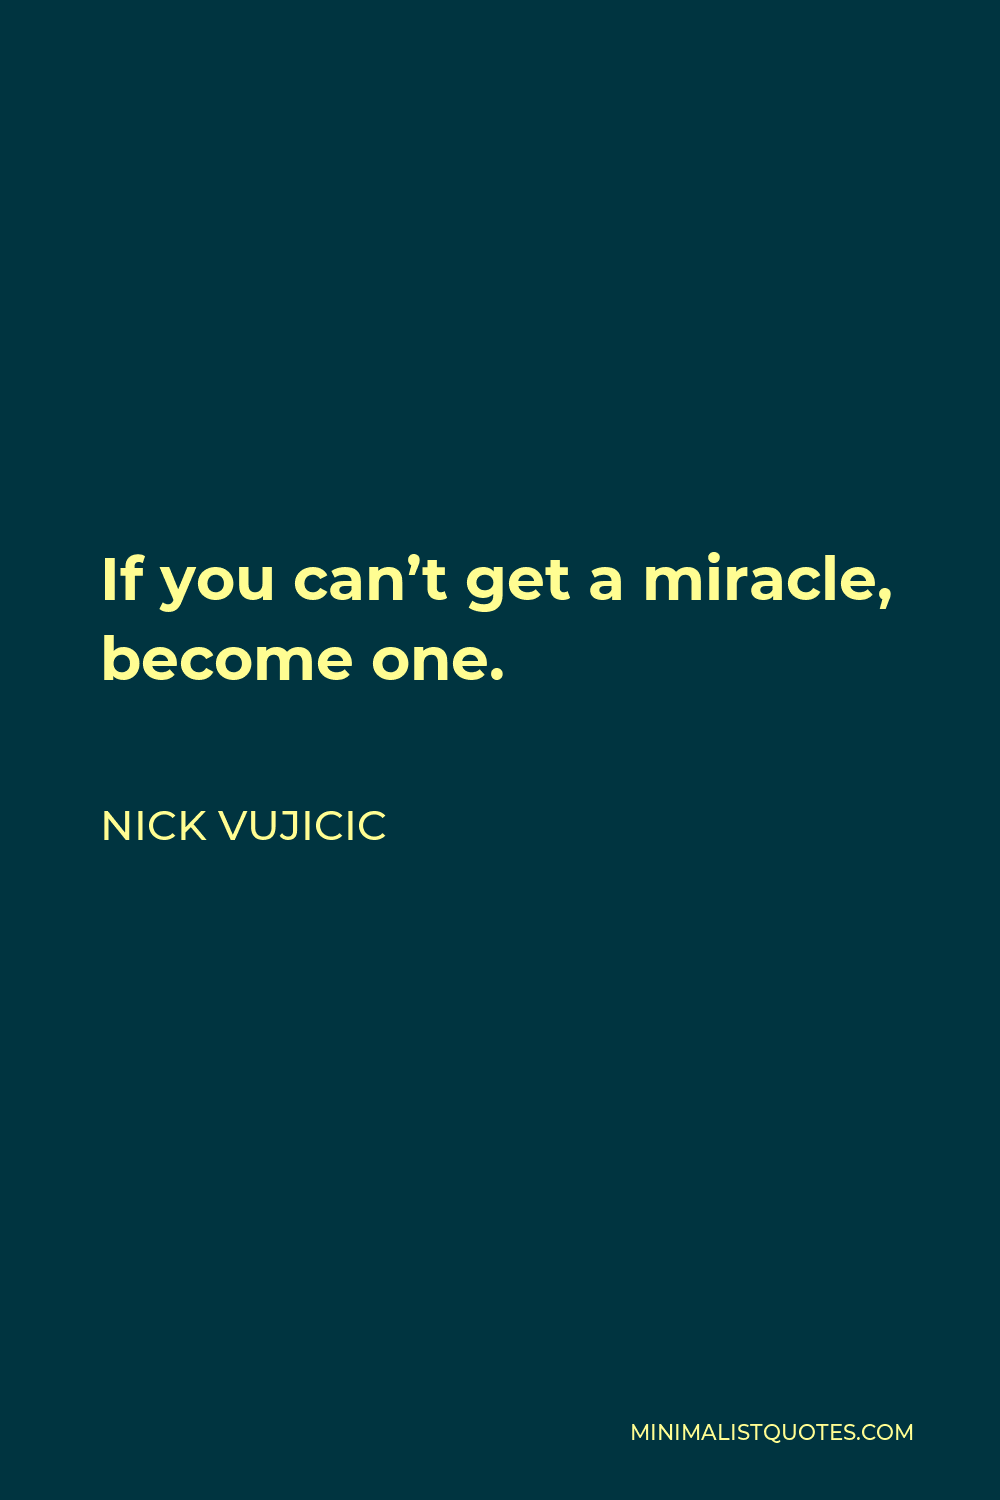 Nick Vujicic Quote - If you can’t get a miracle, become one.